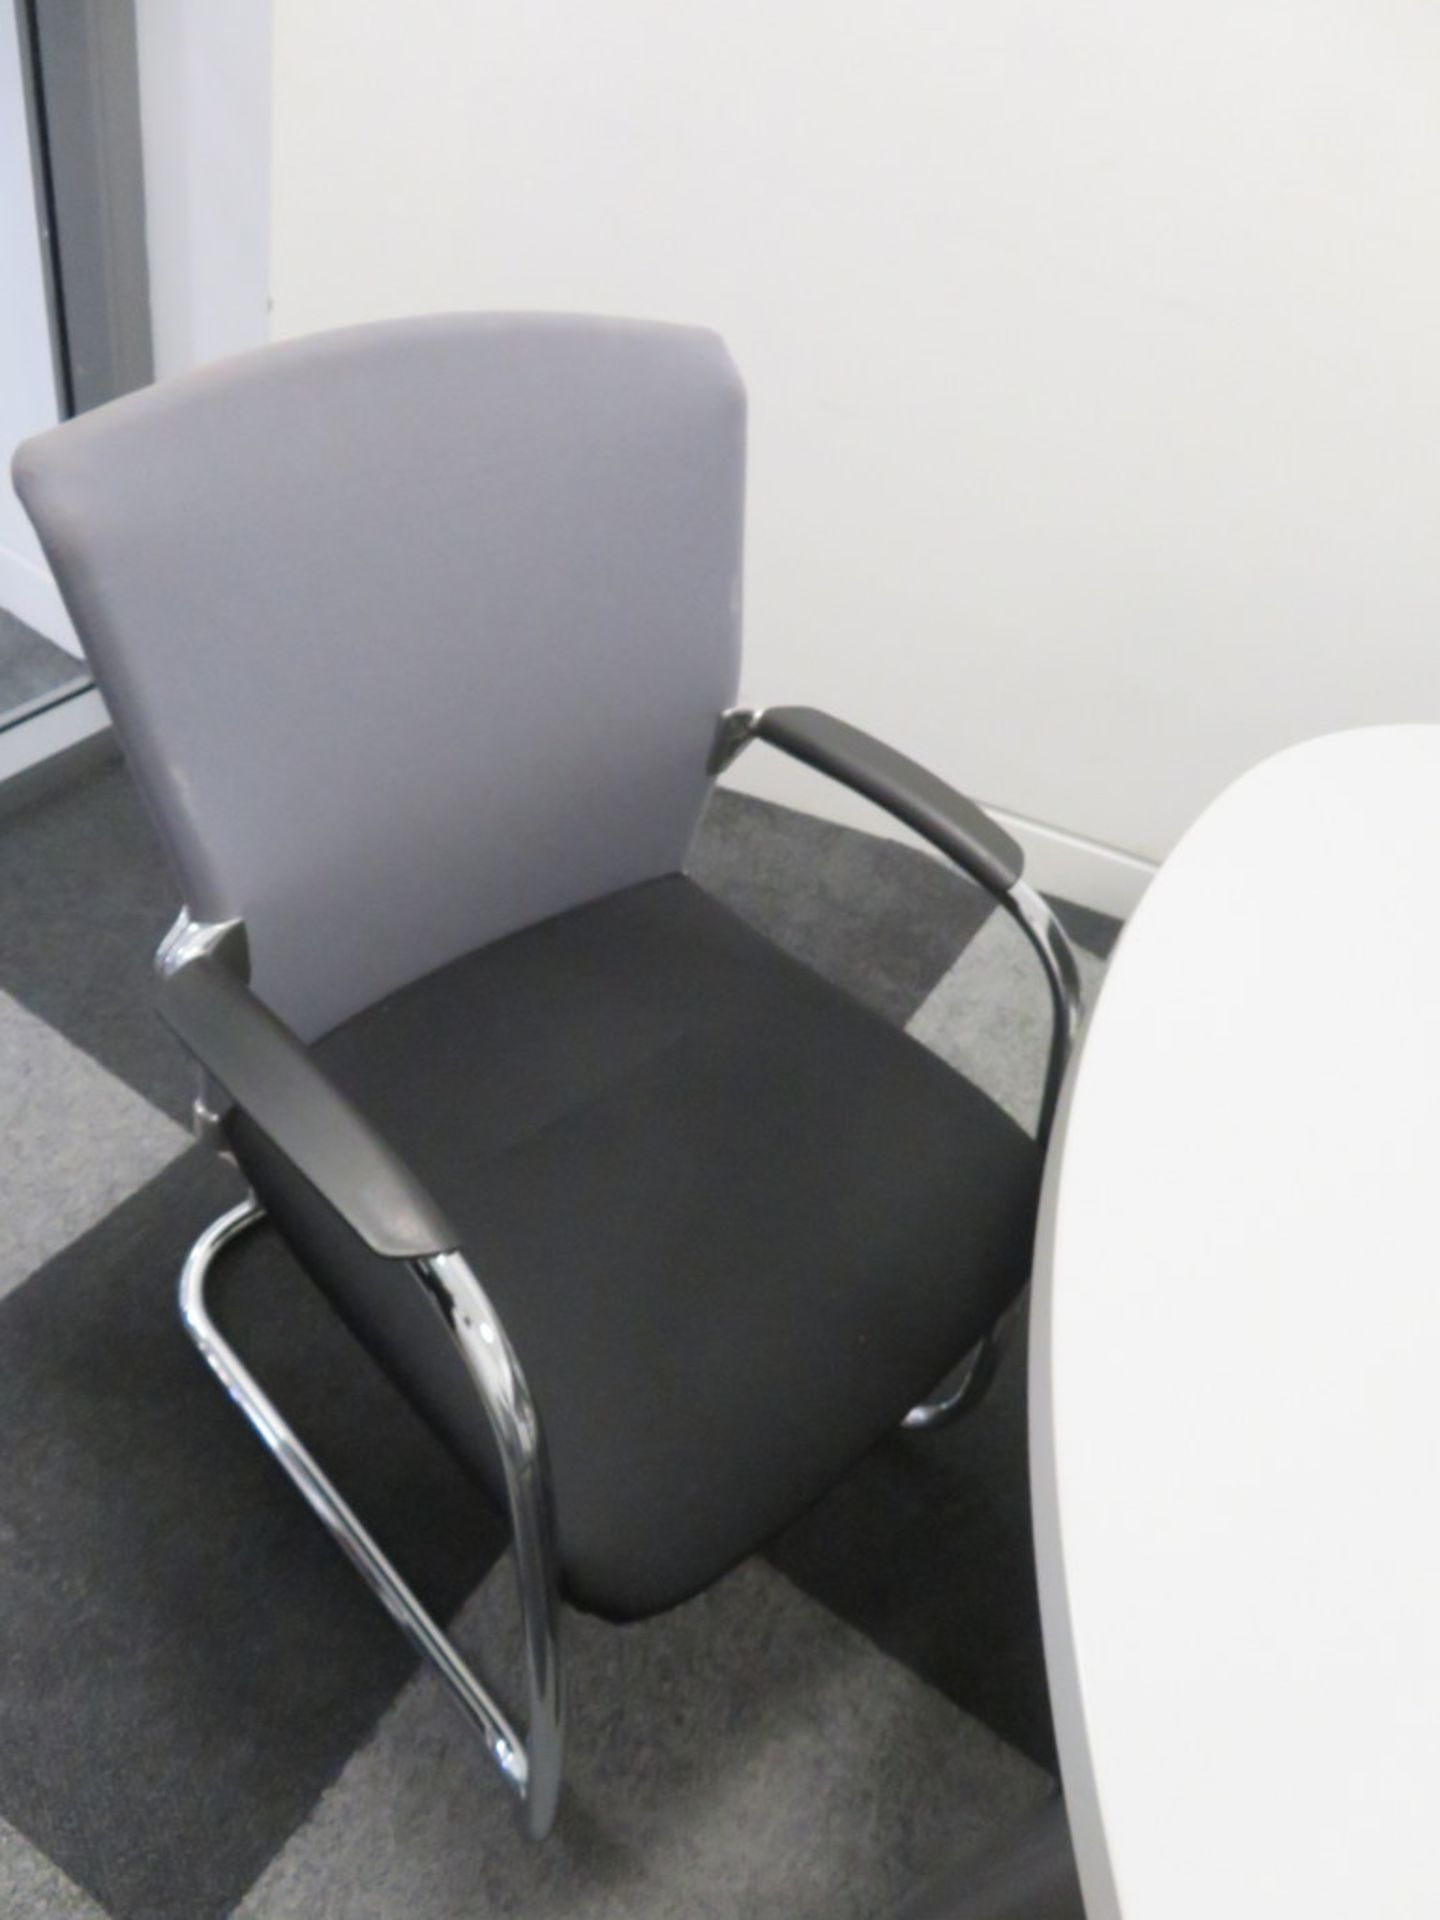 Contents Of A Meeting Room. See Description. - Image 3 of 6